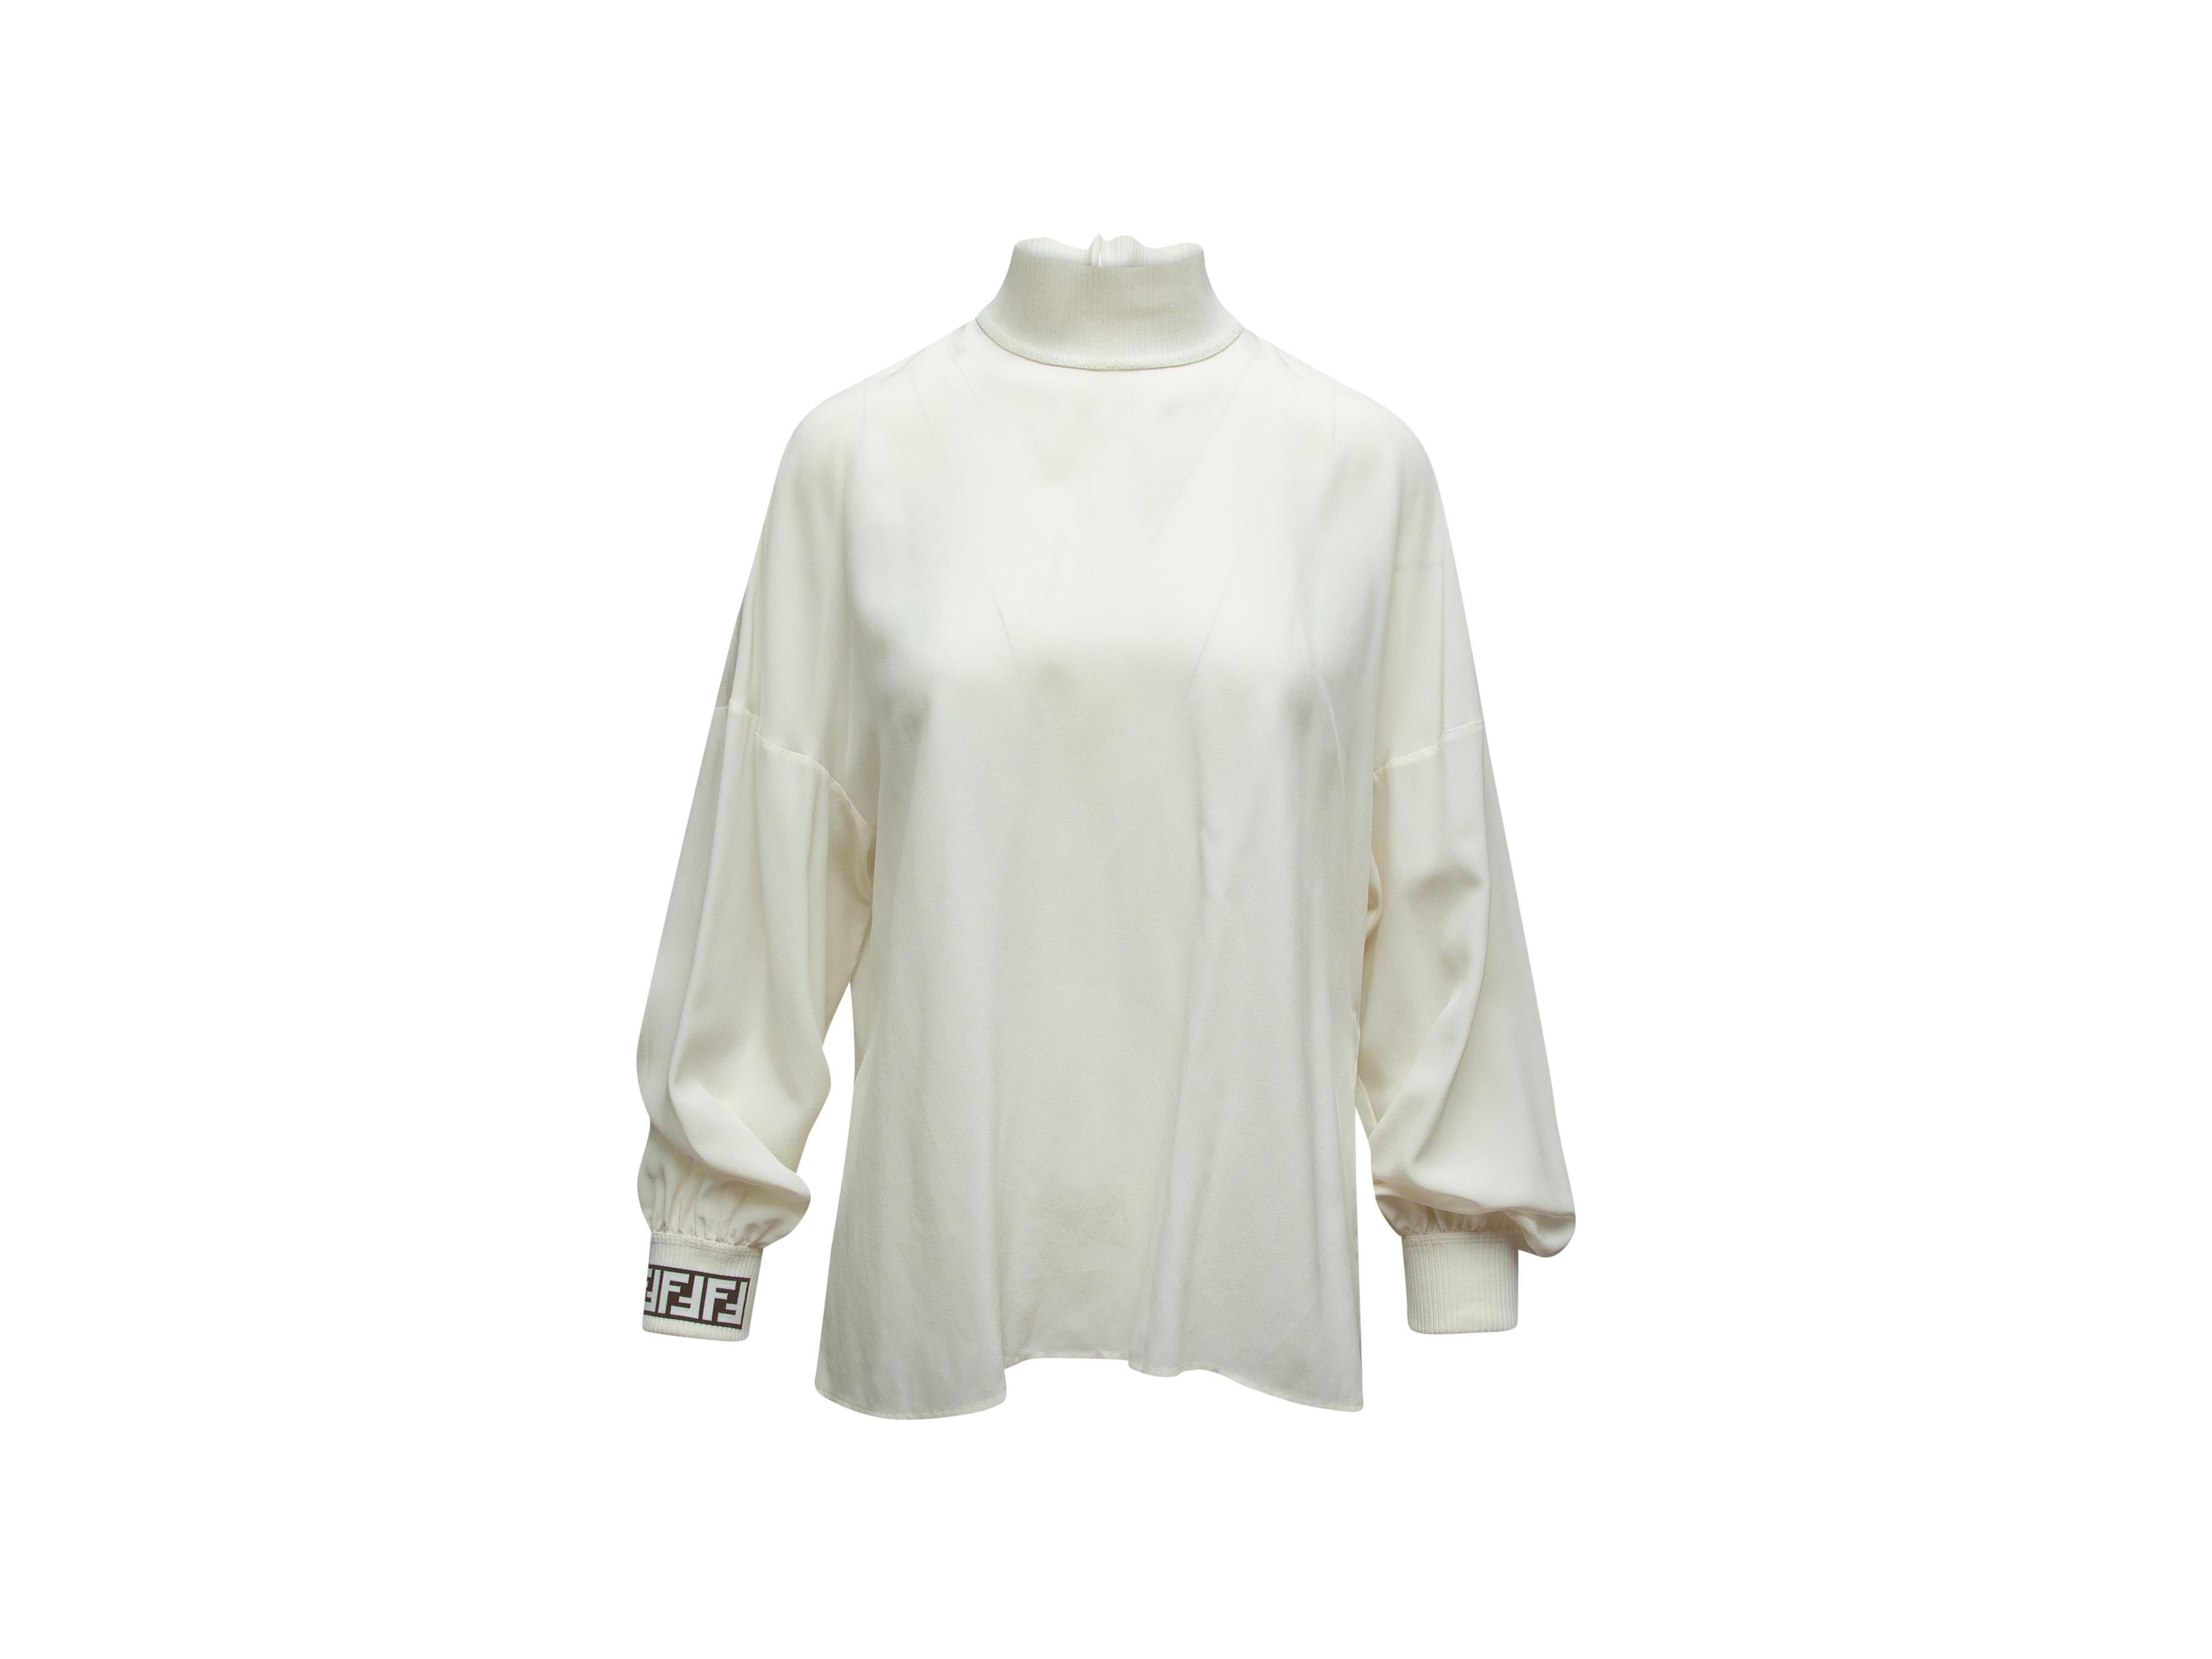 Product details: White silk long sleeve top by Fendi. Mock neck. Black logo print at cuff. Keyhole at back featuring button closure. Designer size 42. 38